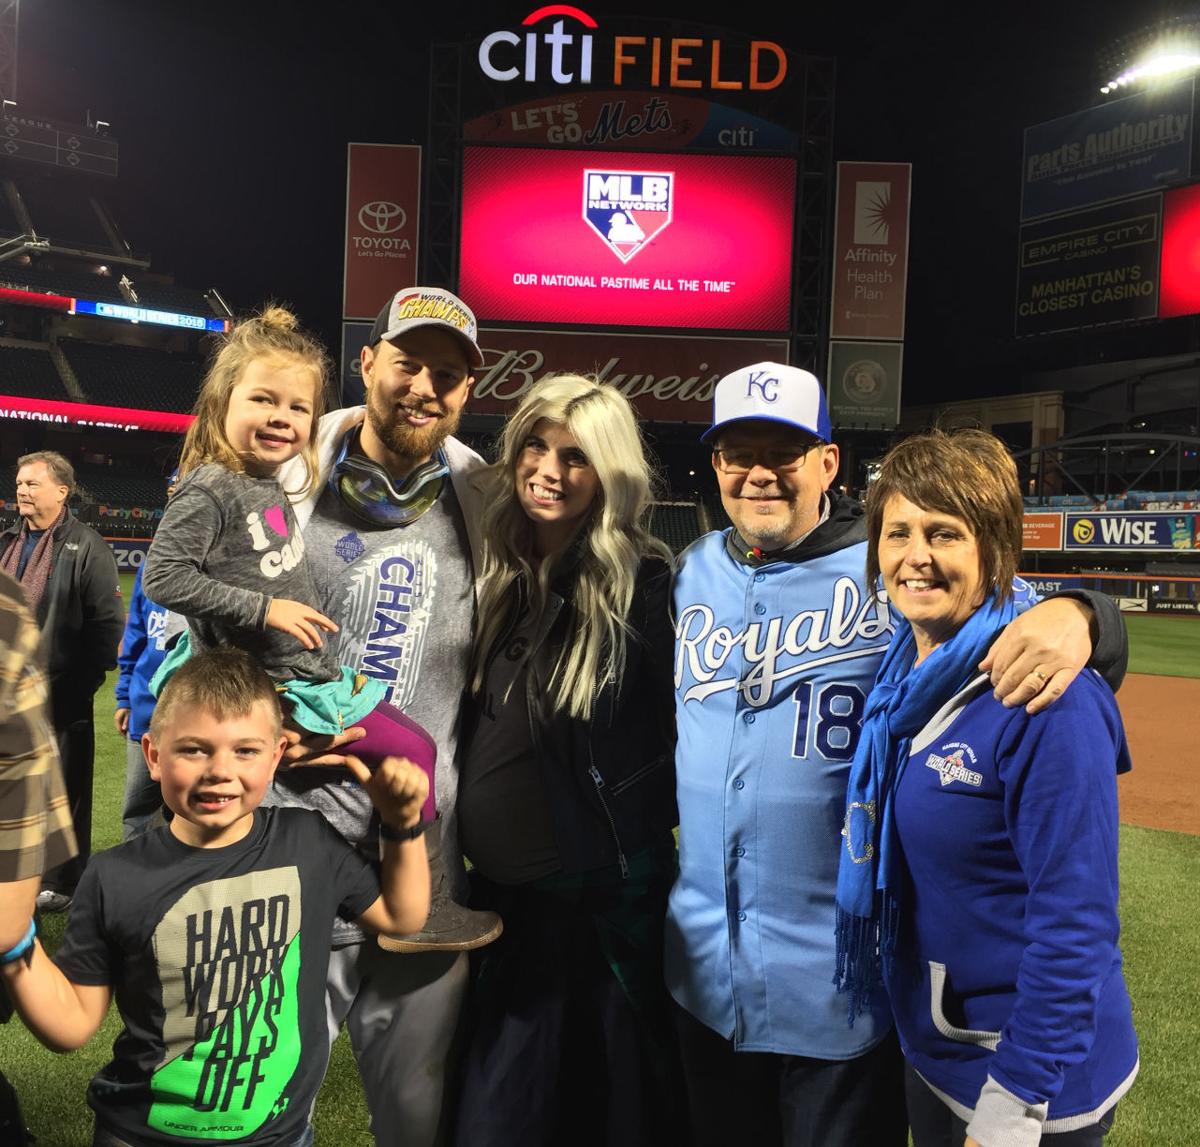 Julianna and Ben Zobrist divorce case might be resolved soon